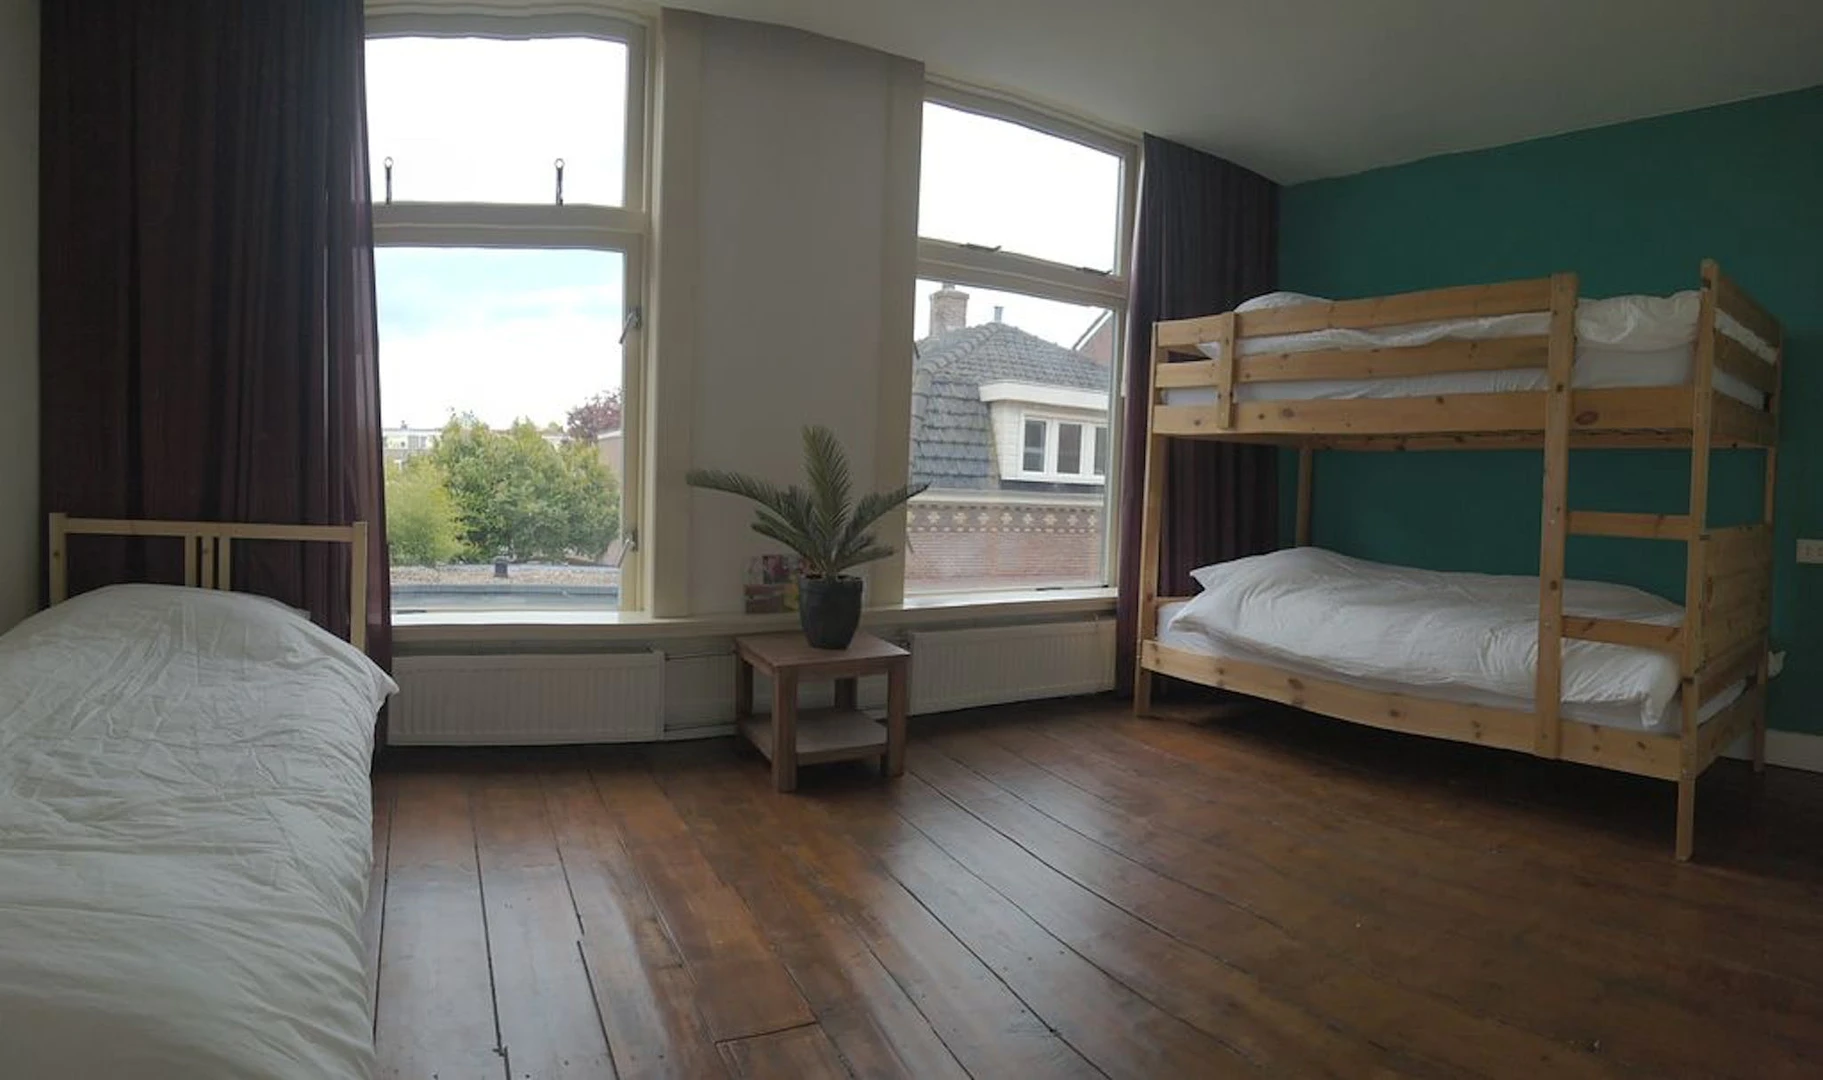 Modern and bright flat in Leiden